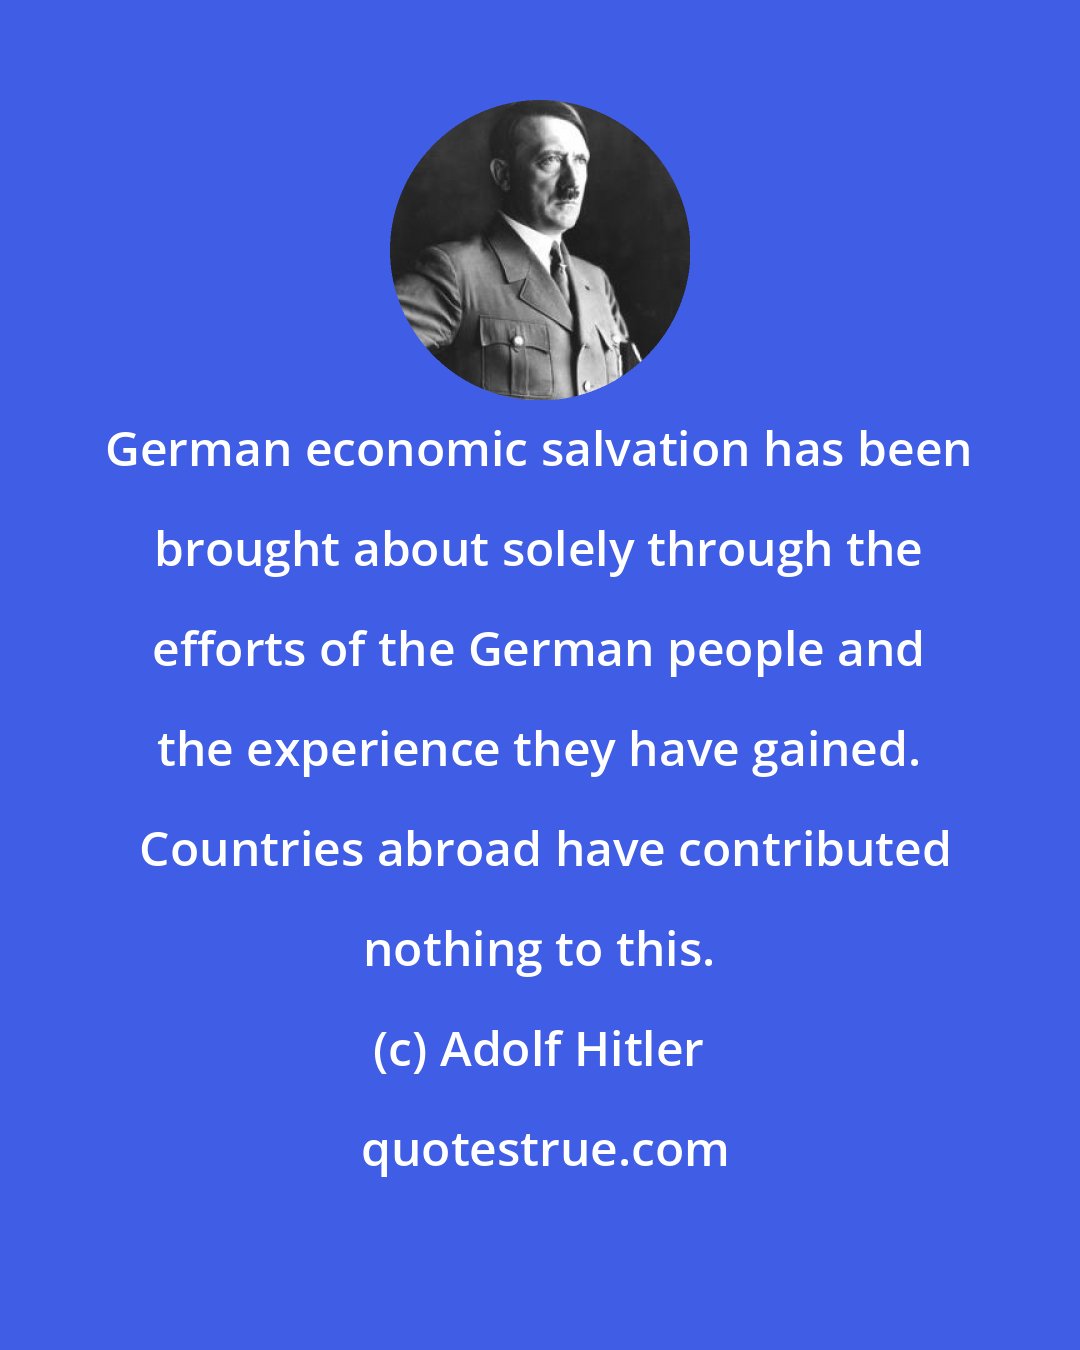 Adolf Hitler: German economic salvation has been brought about solely through the efforts of the German people and the experience they have gained.  Countries abroad have contributed nothing to this.